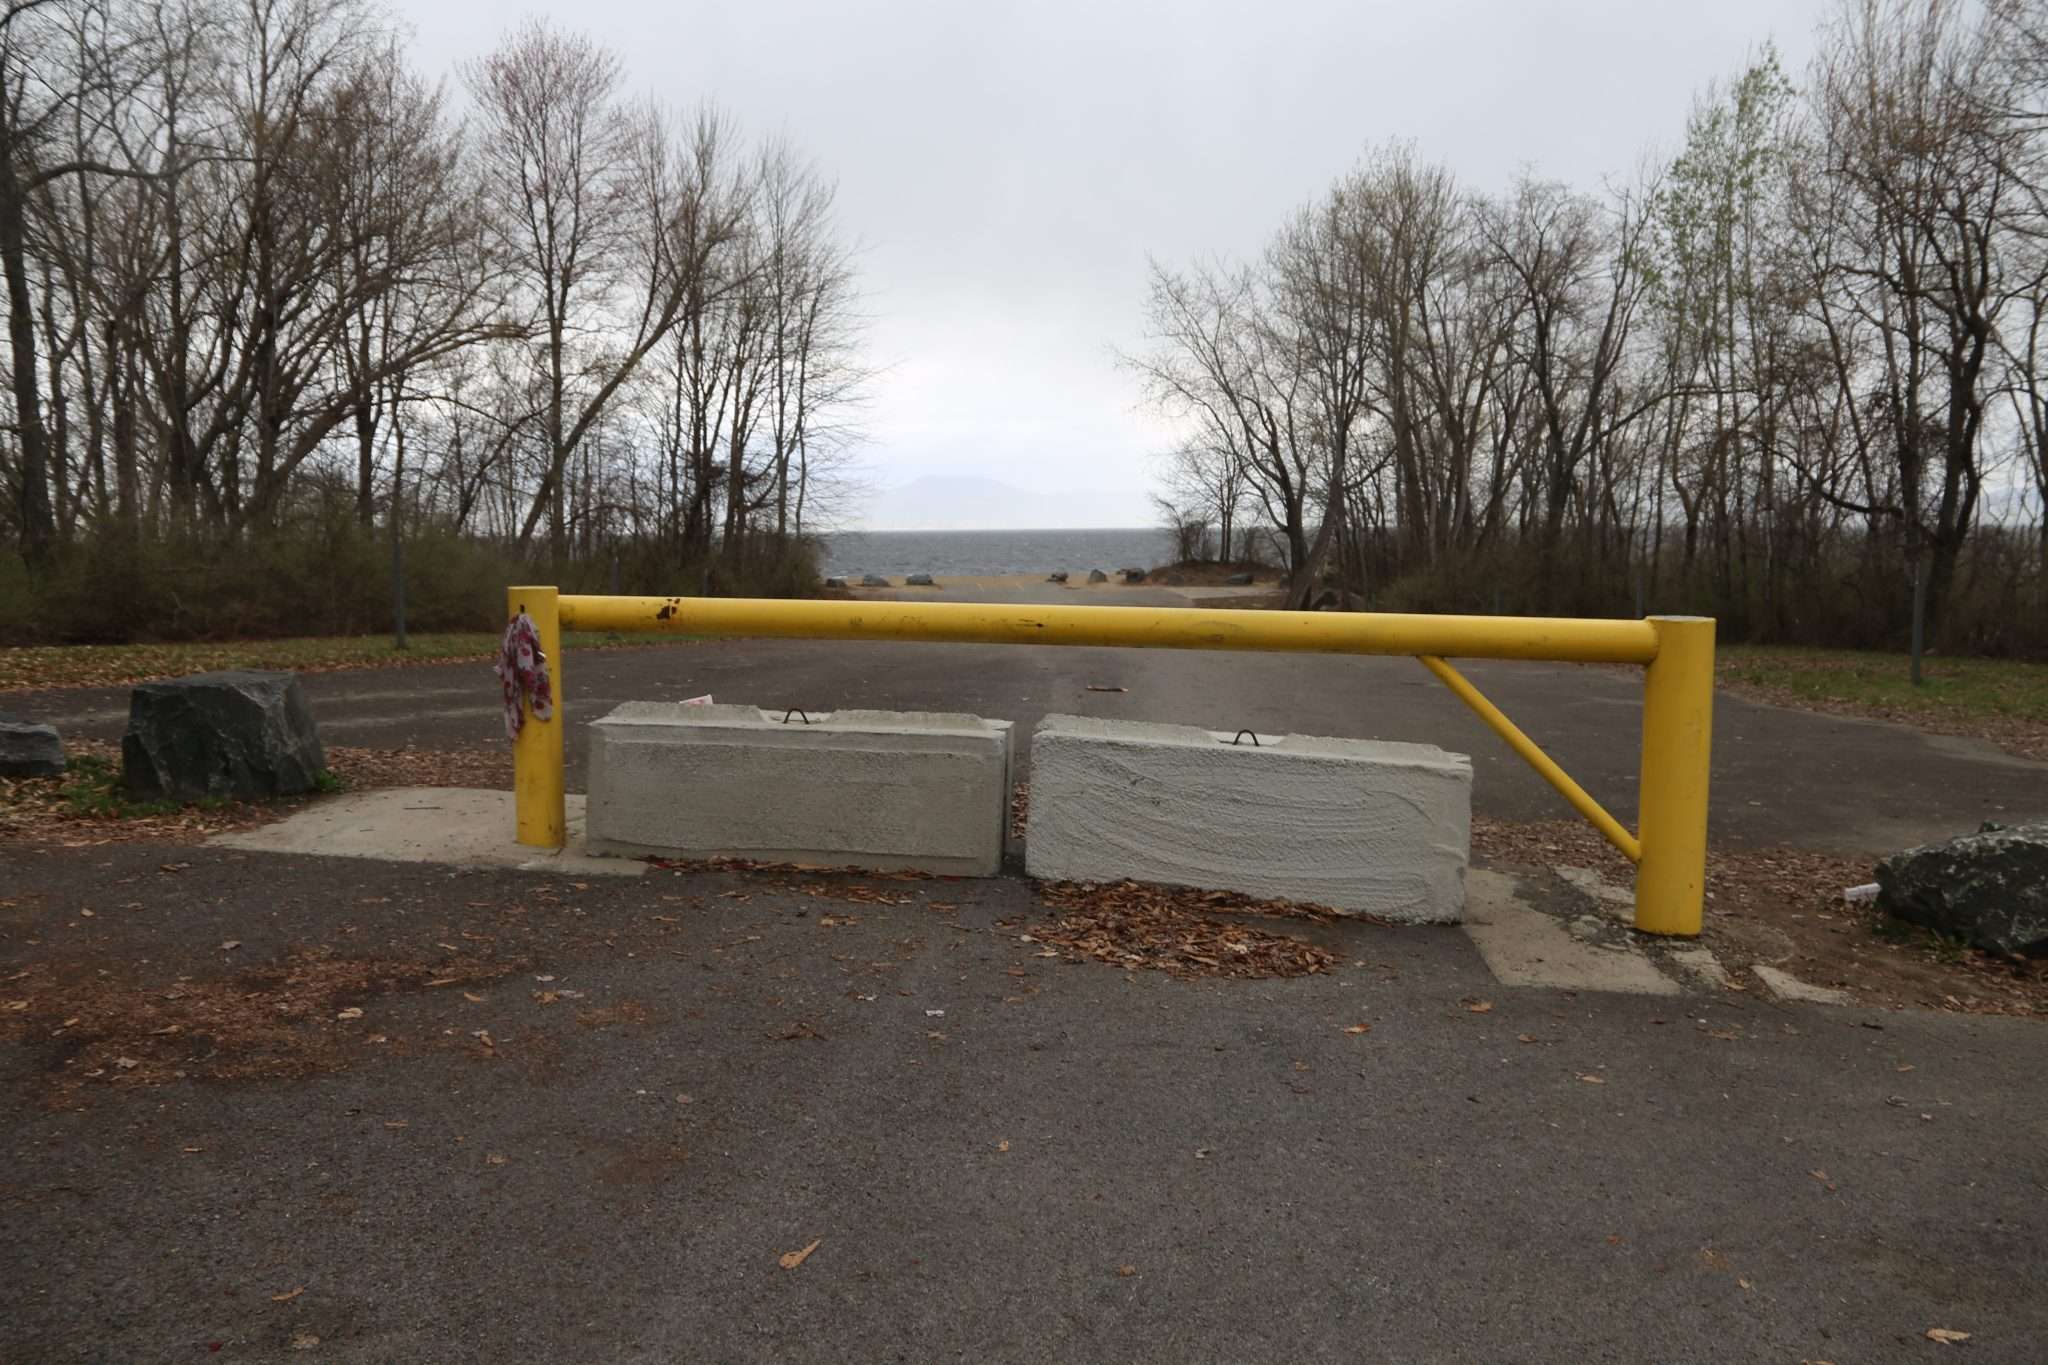 Concrete barriers and a yellow gate sit in the middle of a parking lot once open to the Broadalbin beach.